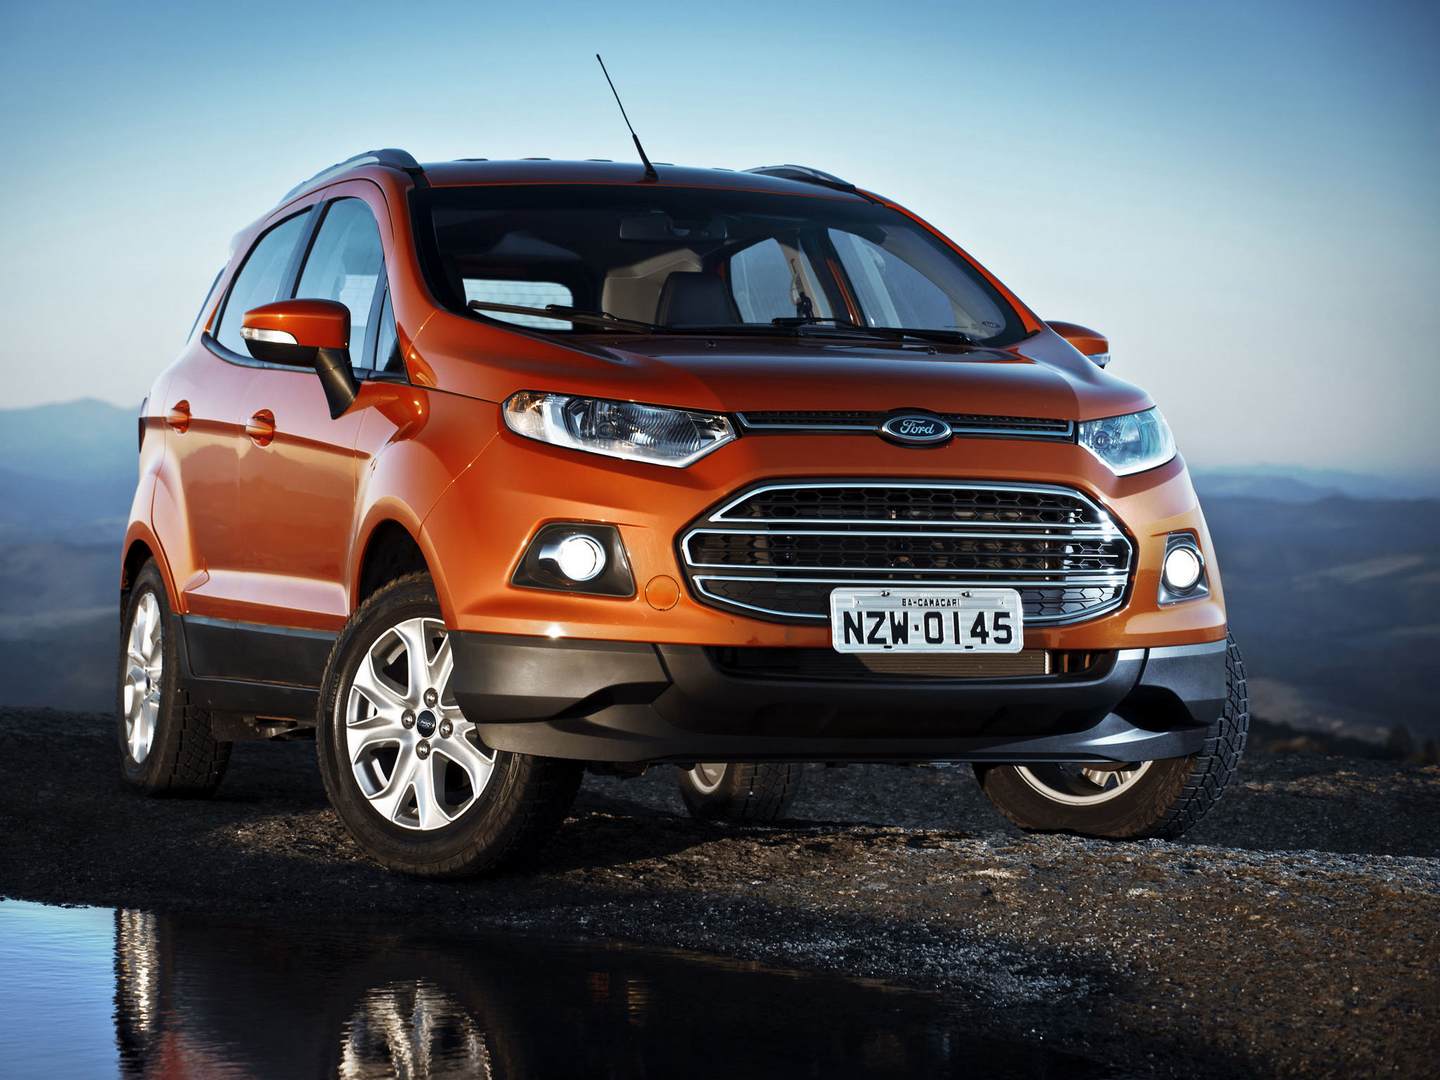 Ford EcoSport wallpaper HD free download